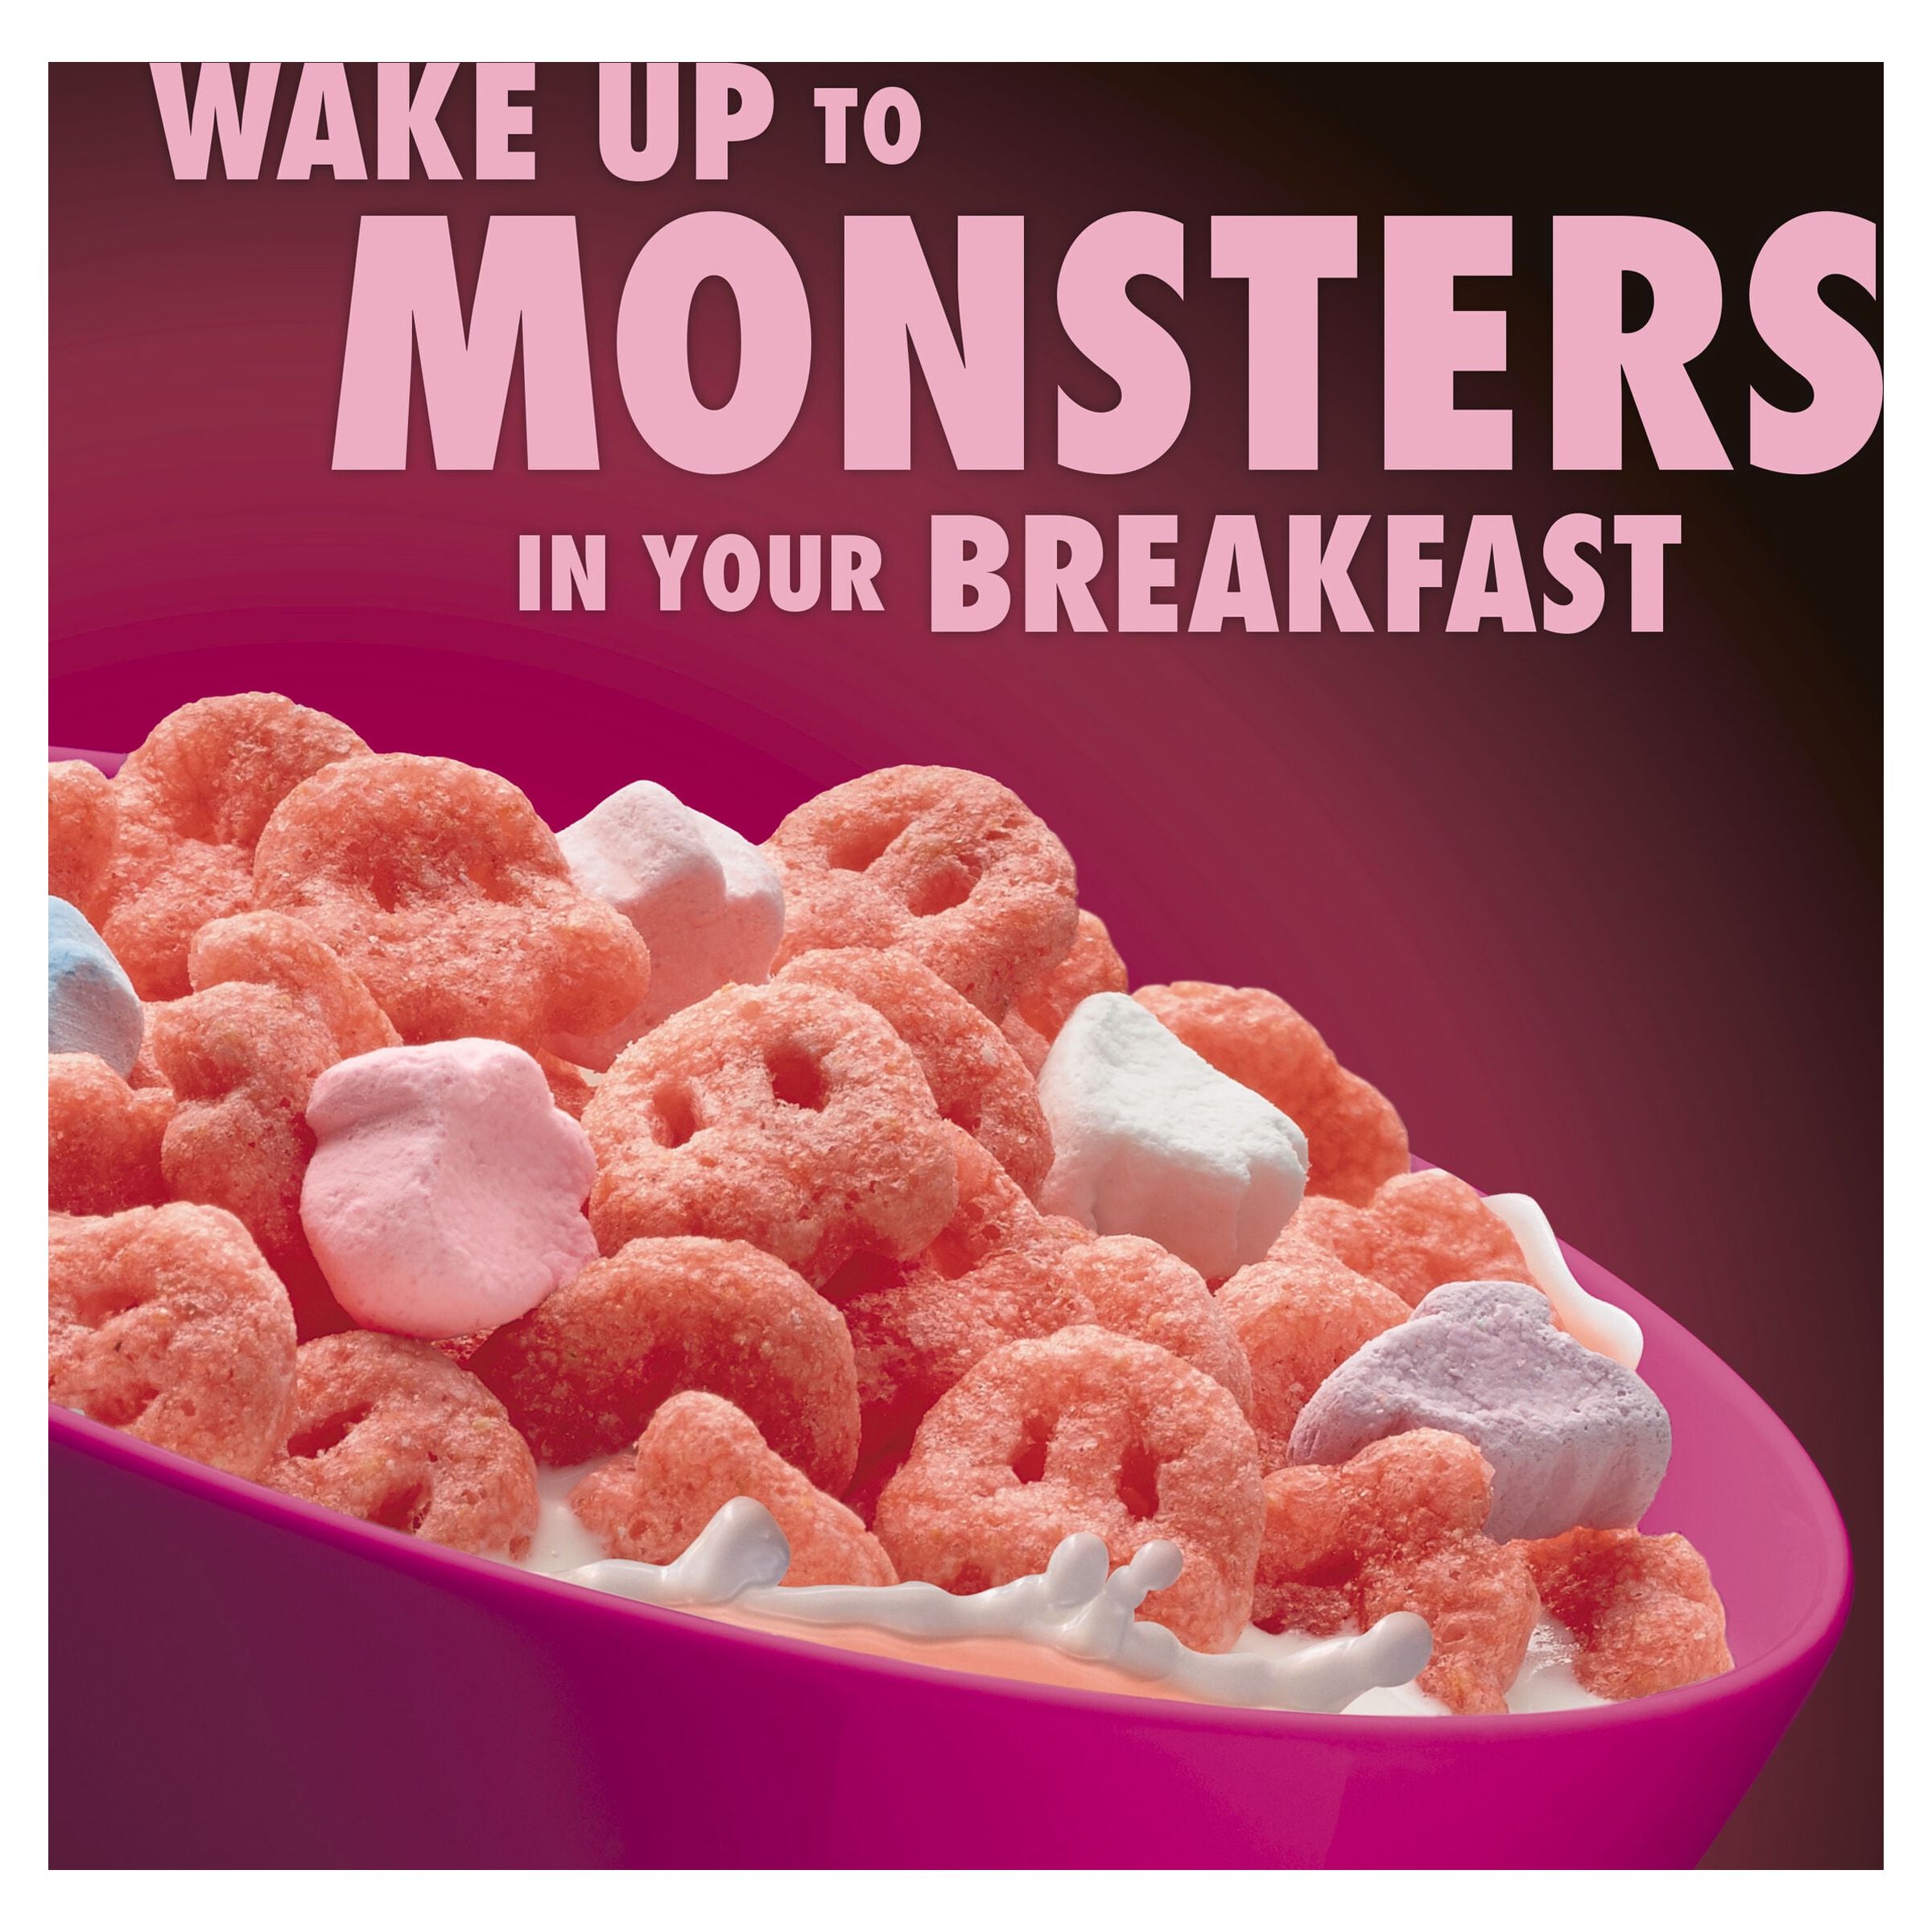 Franken Berry Cereal with Monster Marshmallows, Limited Edition, Family Size, 16 oz - image 4 of 10